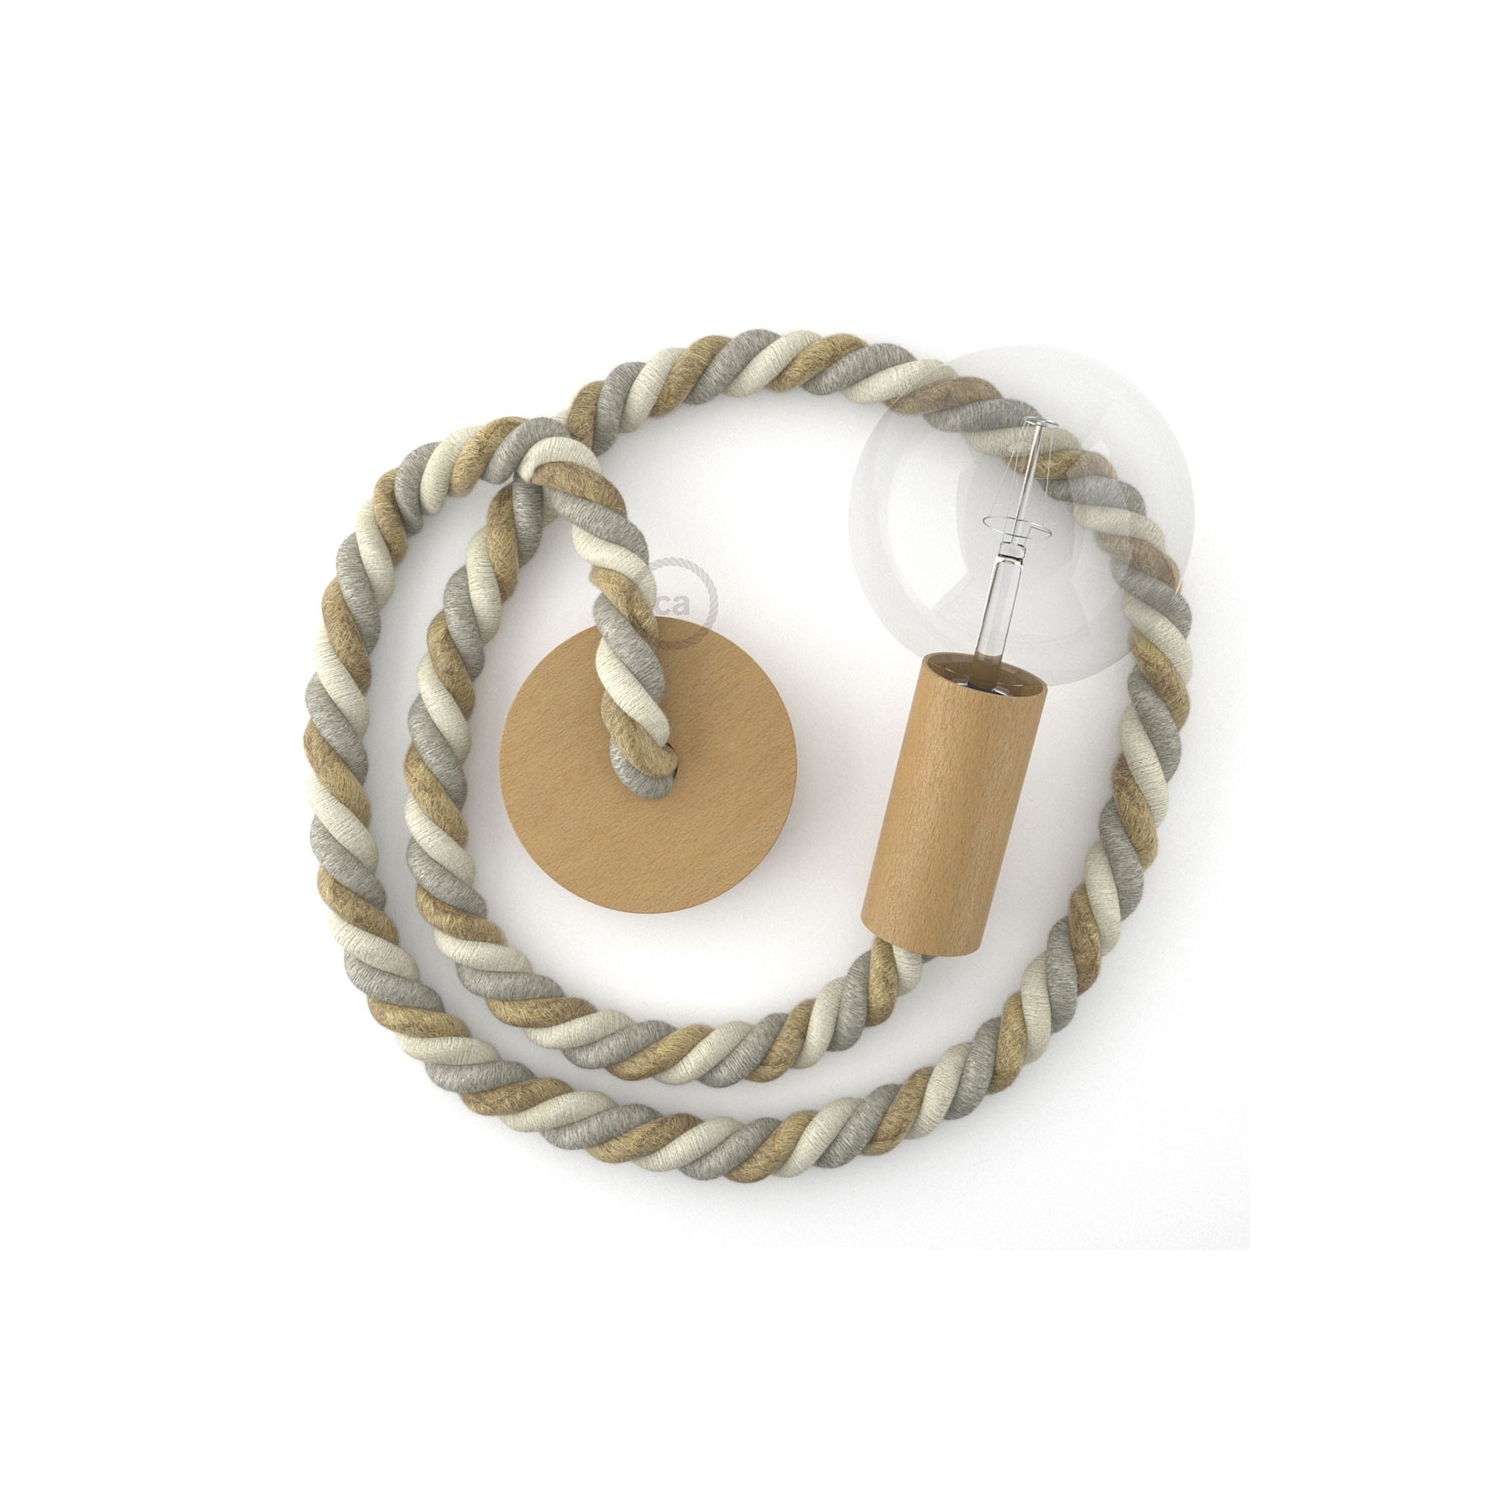 Wooden Pendant, suspended lamp with nautical 2XL 24mm rope in jute, cotton and linen Country, Made in Italy